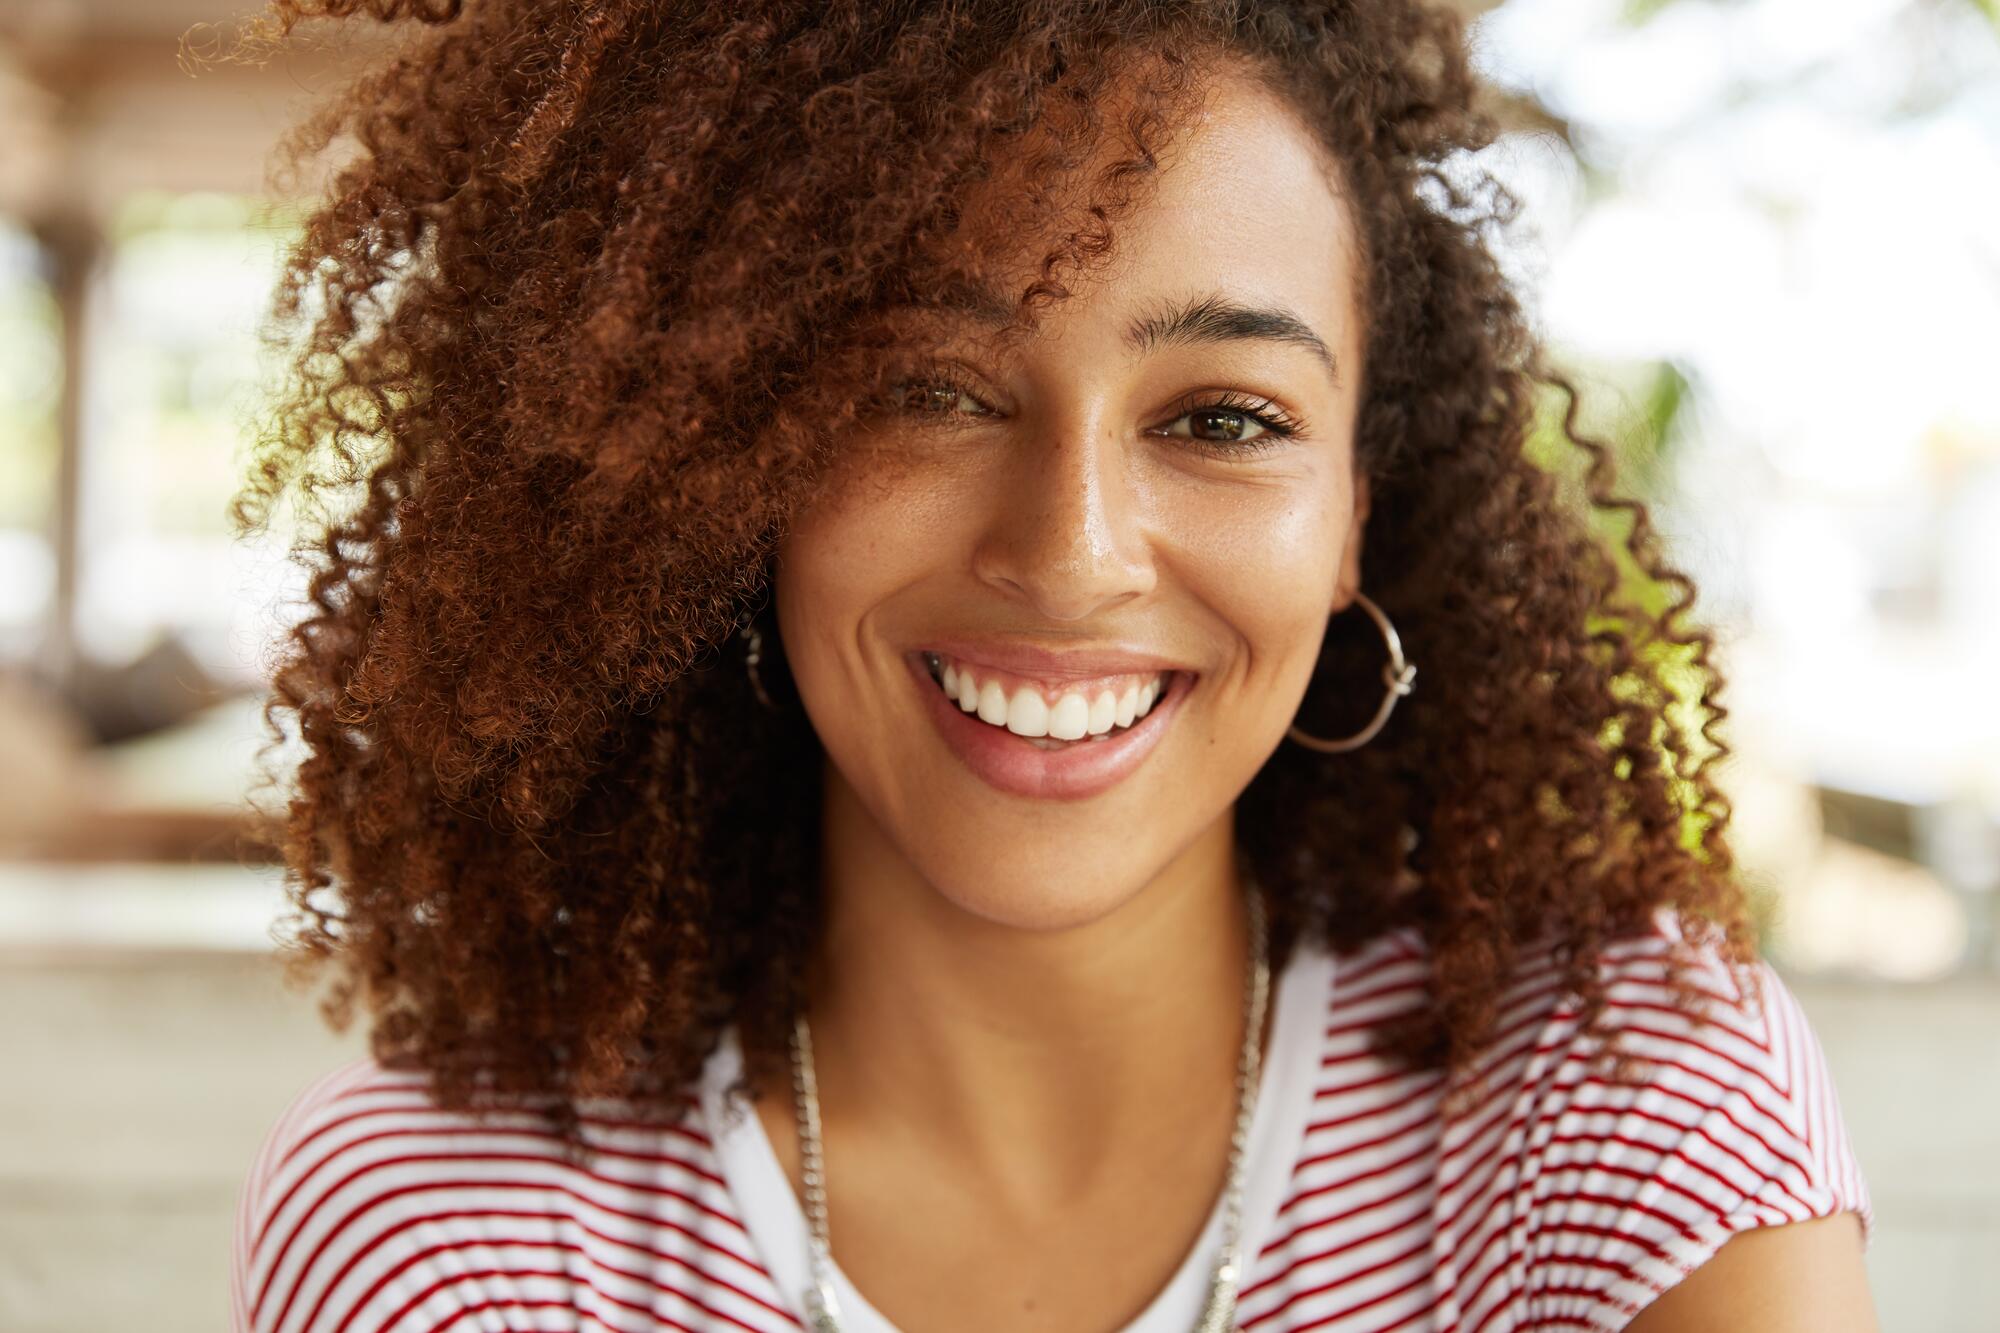 OC_YOUNG_WOMAN_SMILE_HAPPY_SHUTTERSTOCK_1042917214